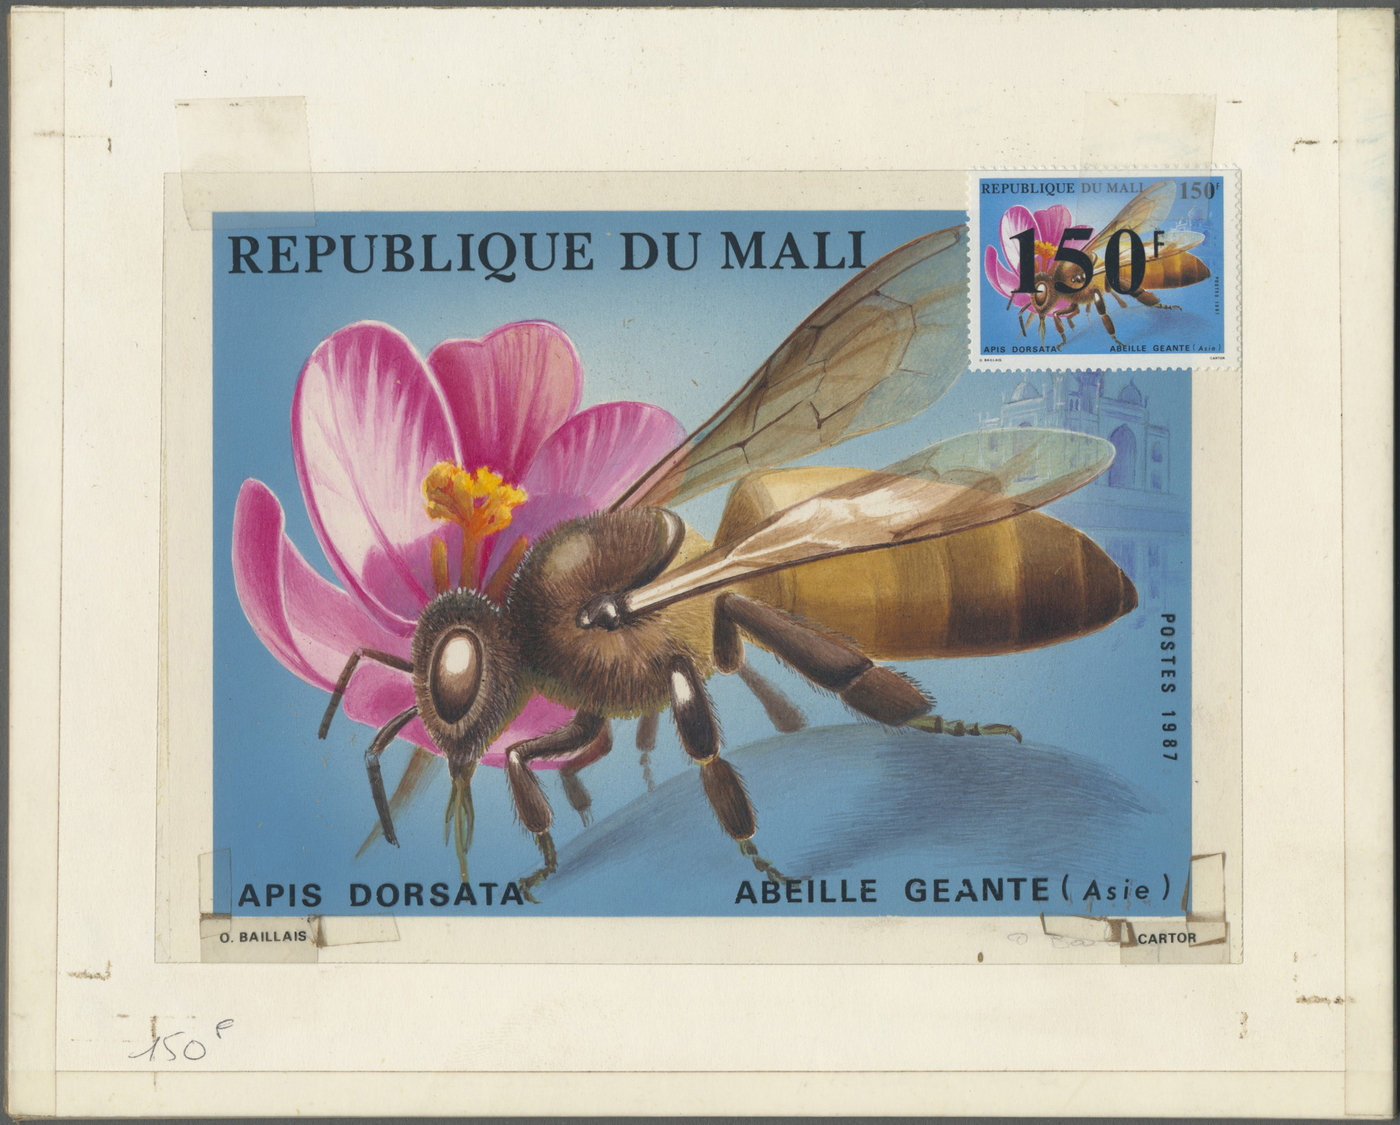 Thematik: Tiere-Bienen / Animals-bees: 1987, Mali. Artwork For The 150fr Value Of The "Bees" Series Showing "Apis Dorsat - Honeybees